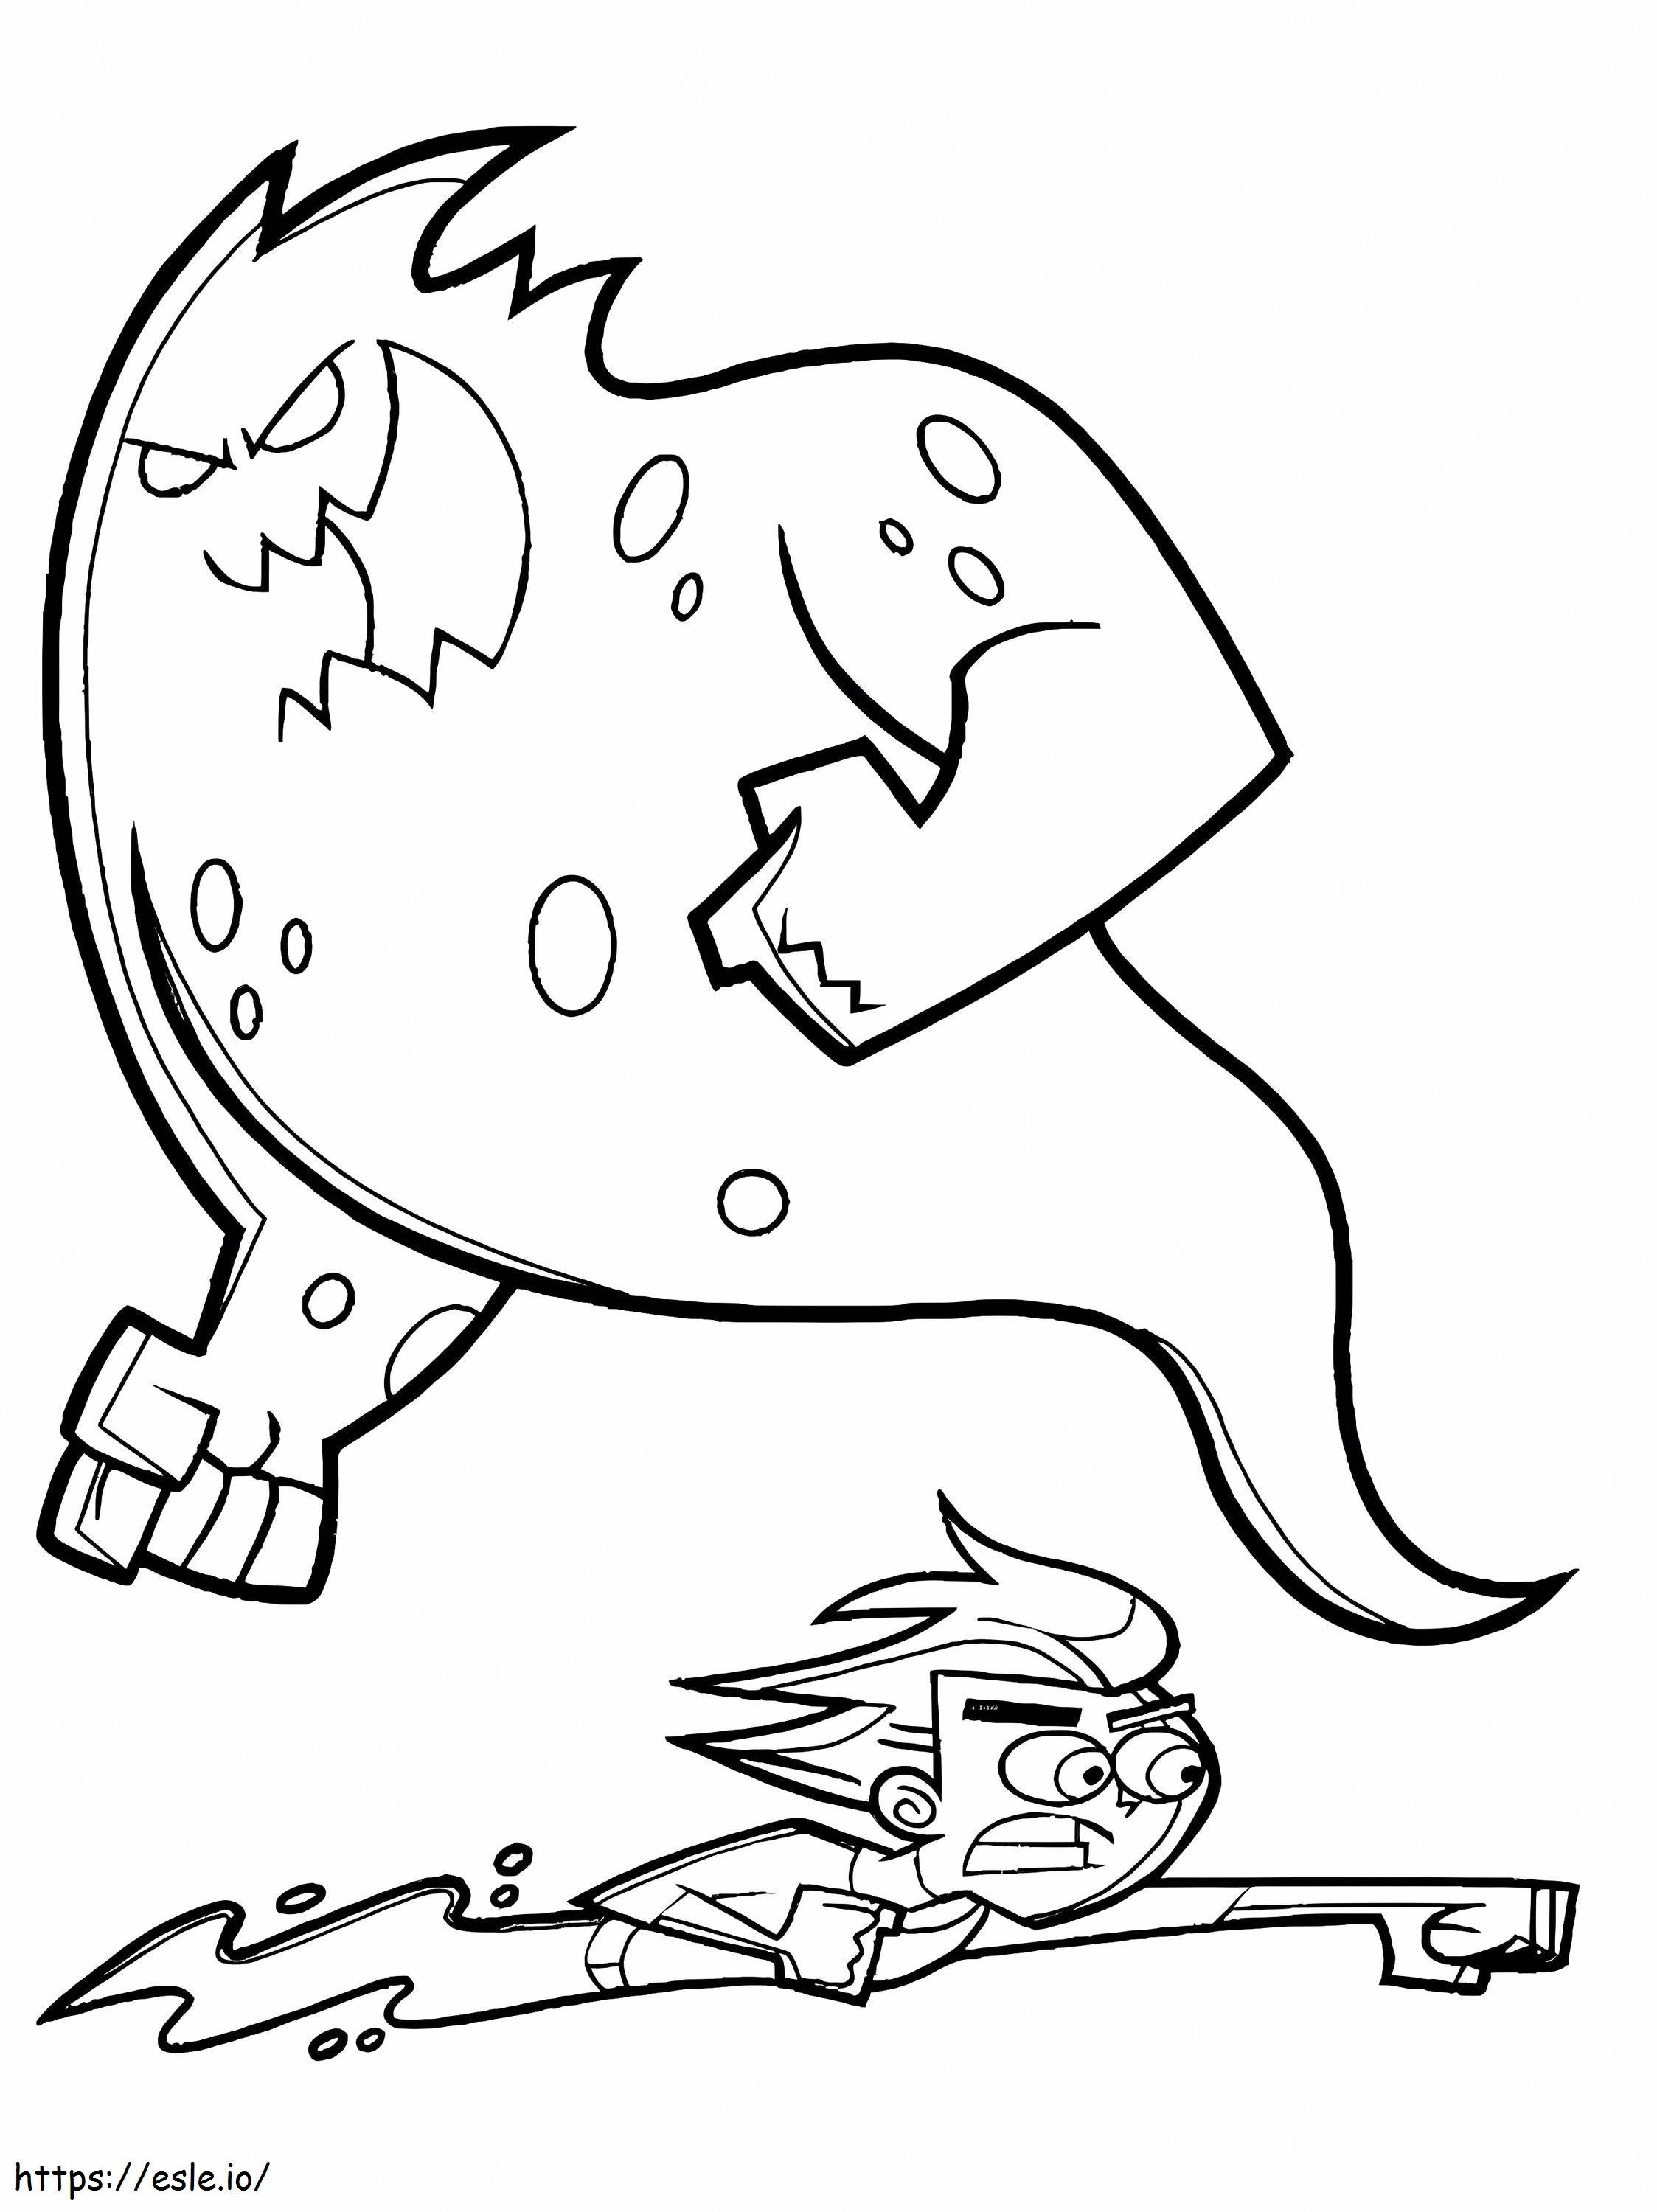 Danny Phantom Is Fighting coloring page